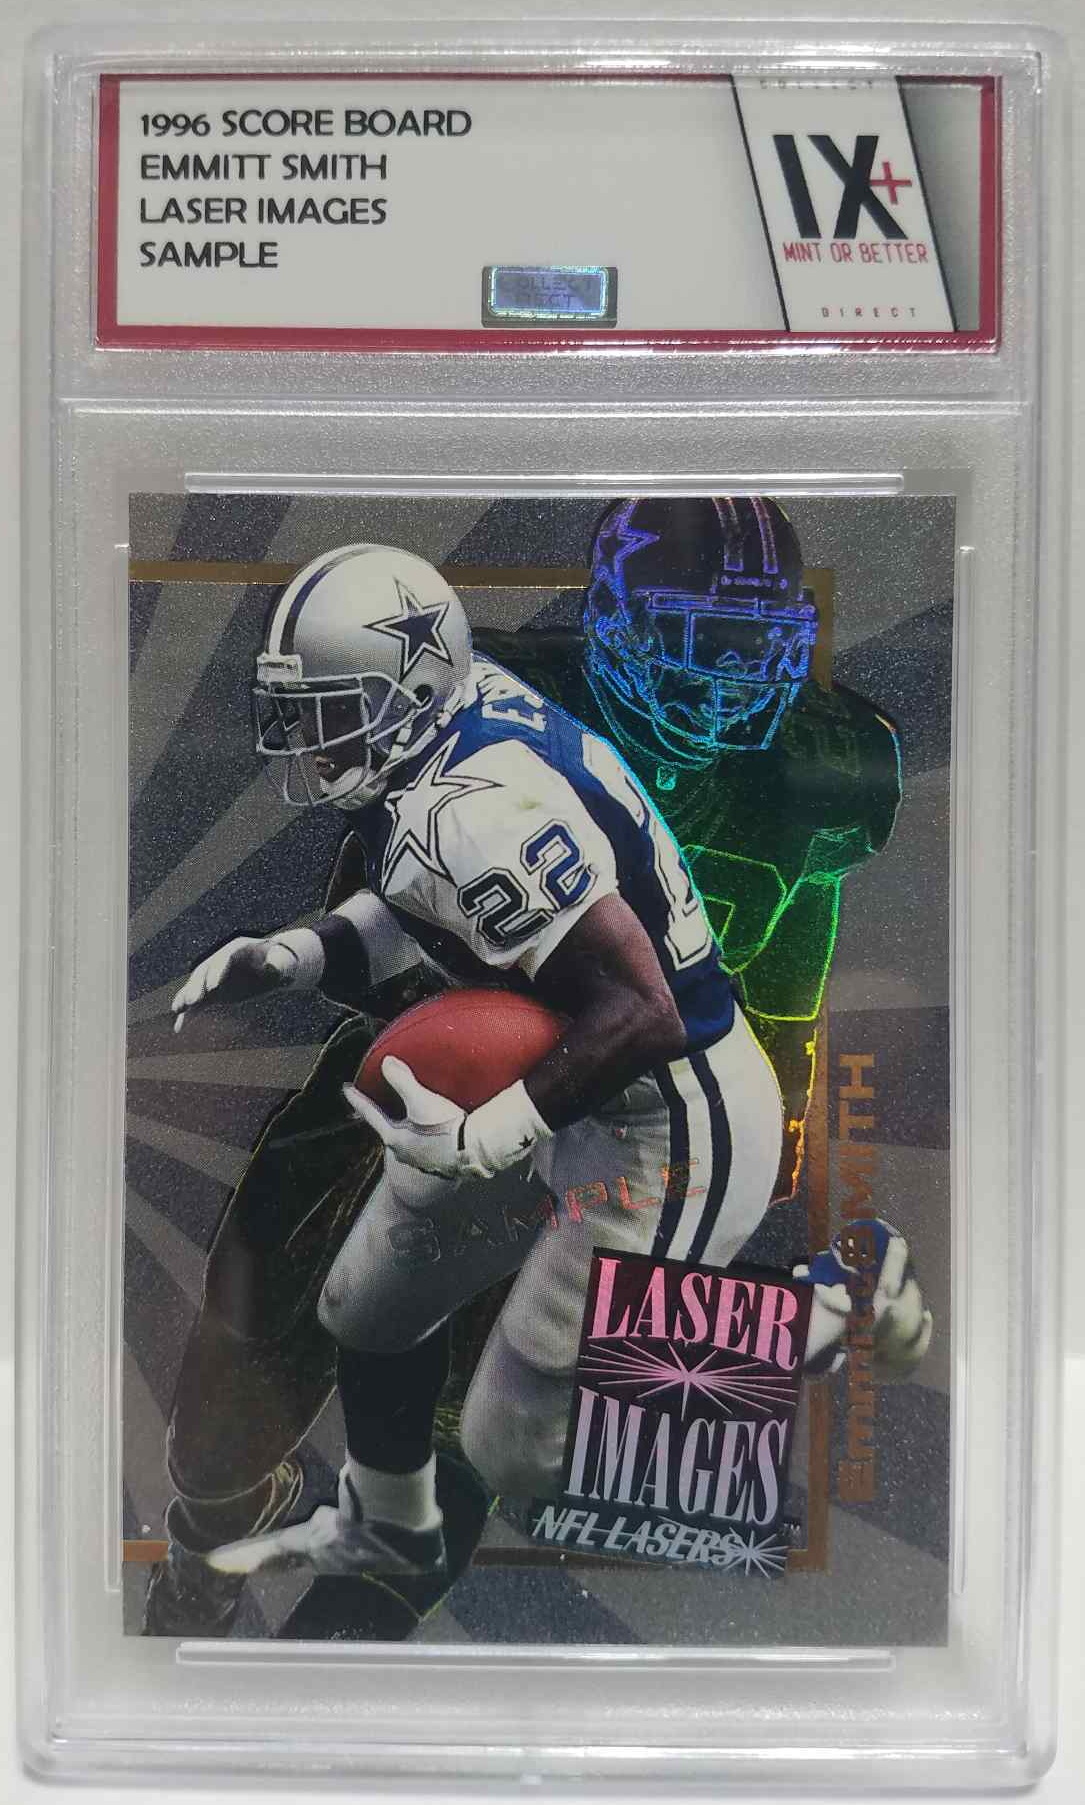 EMMITT SMITH 1996 Score Board Laser Images Sample Collect Direct Graded Mint or Better DALLAS COWBOYS